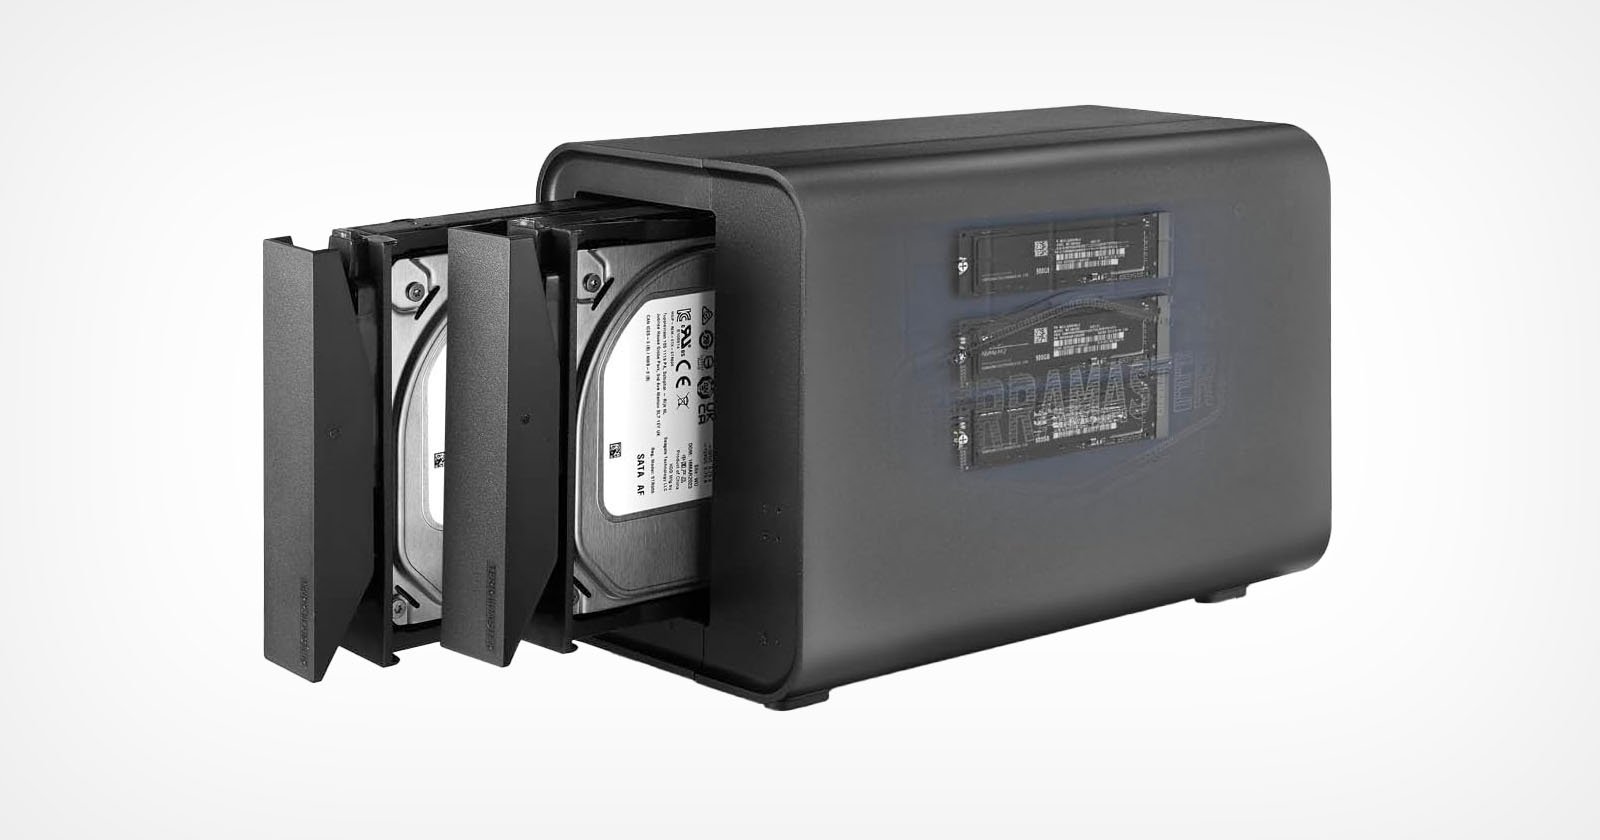 TerraMasters D5 Hybrid is First-Ever Dual SSD and HDD Storage Enclosure